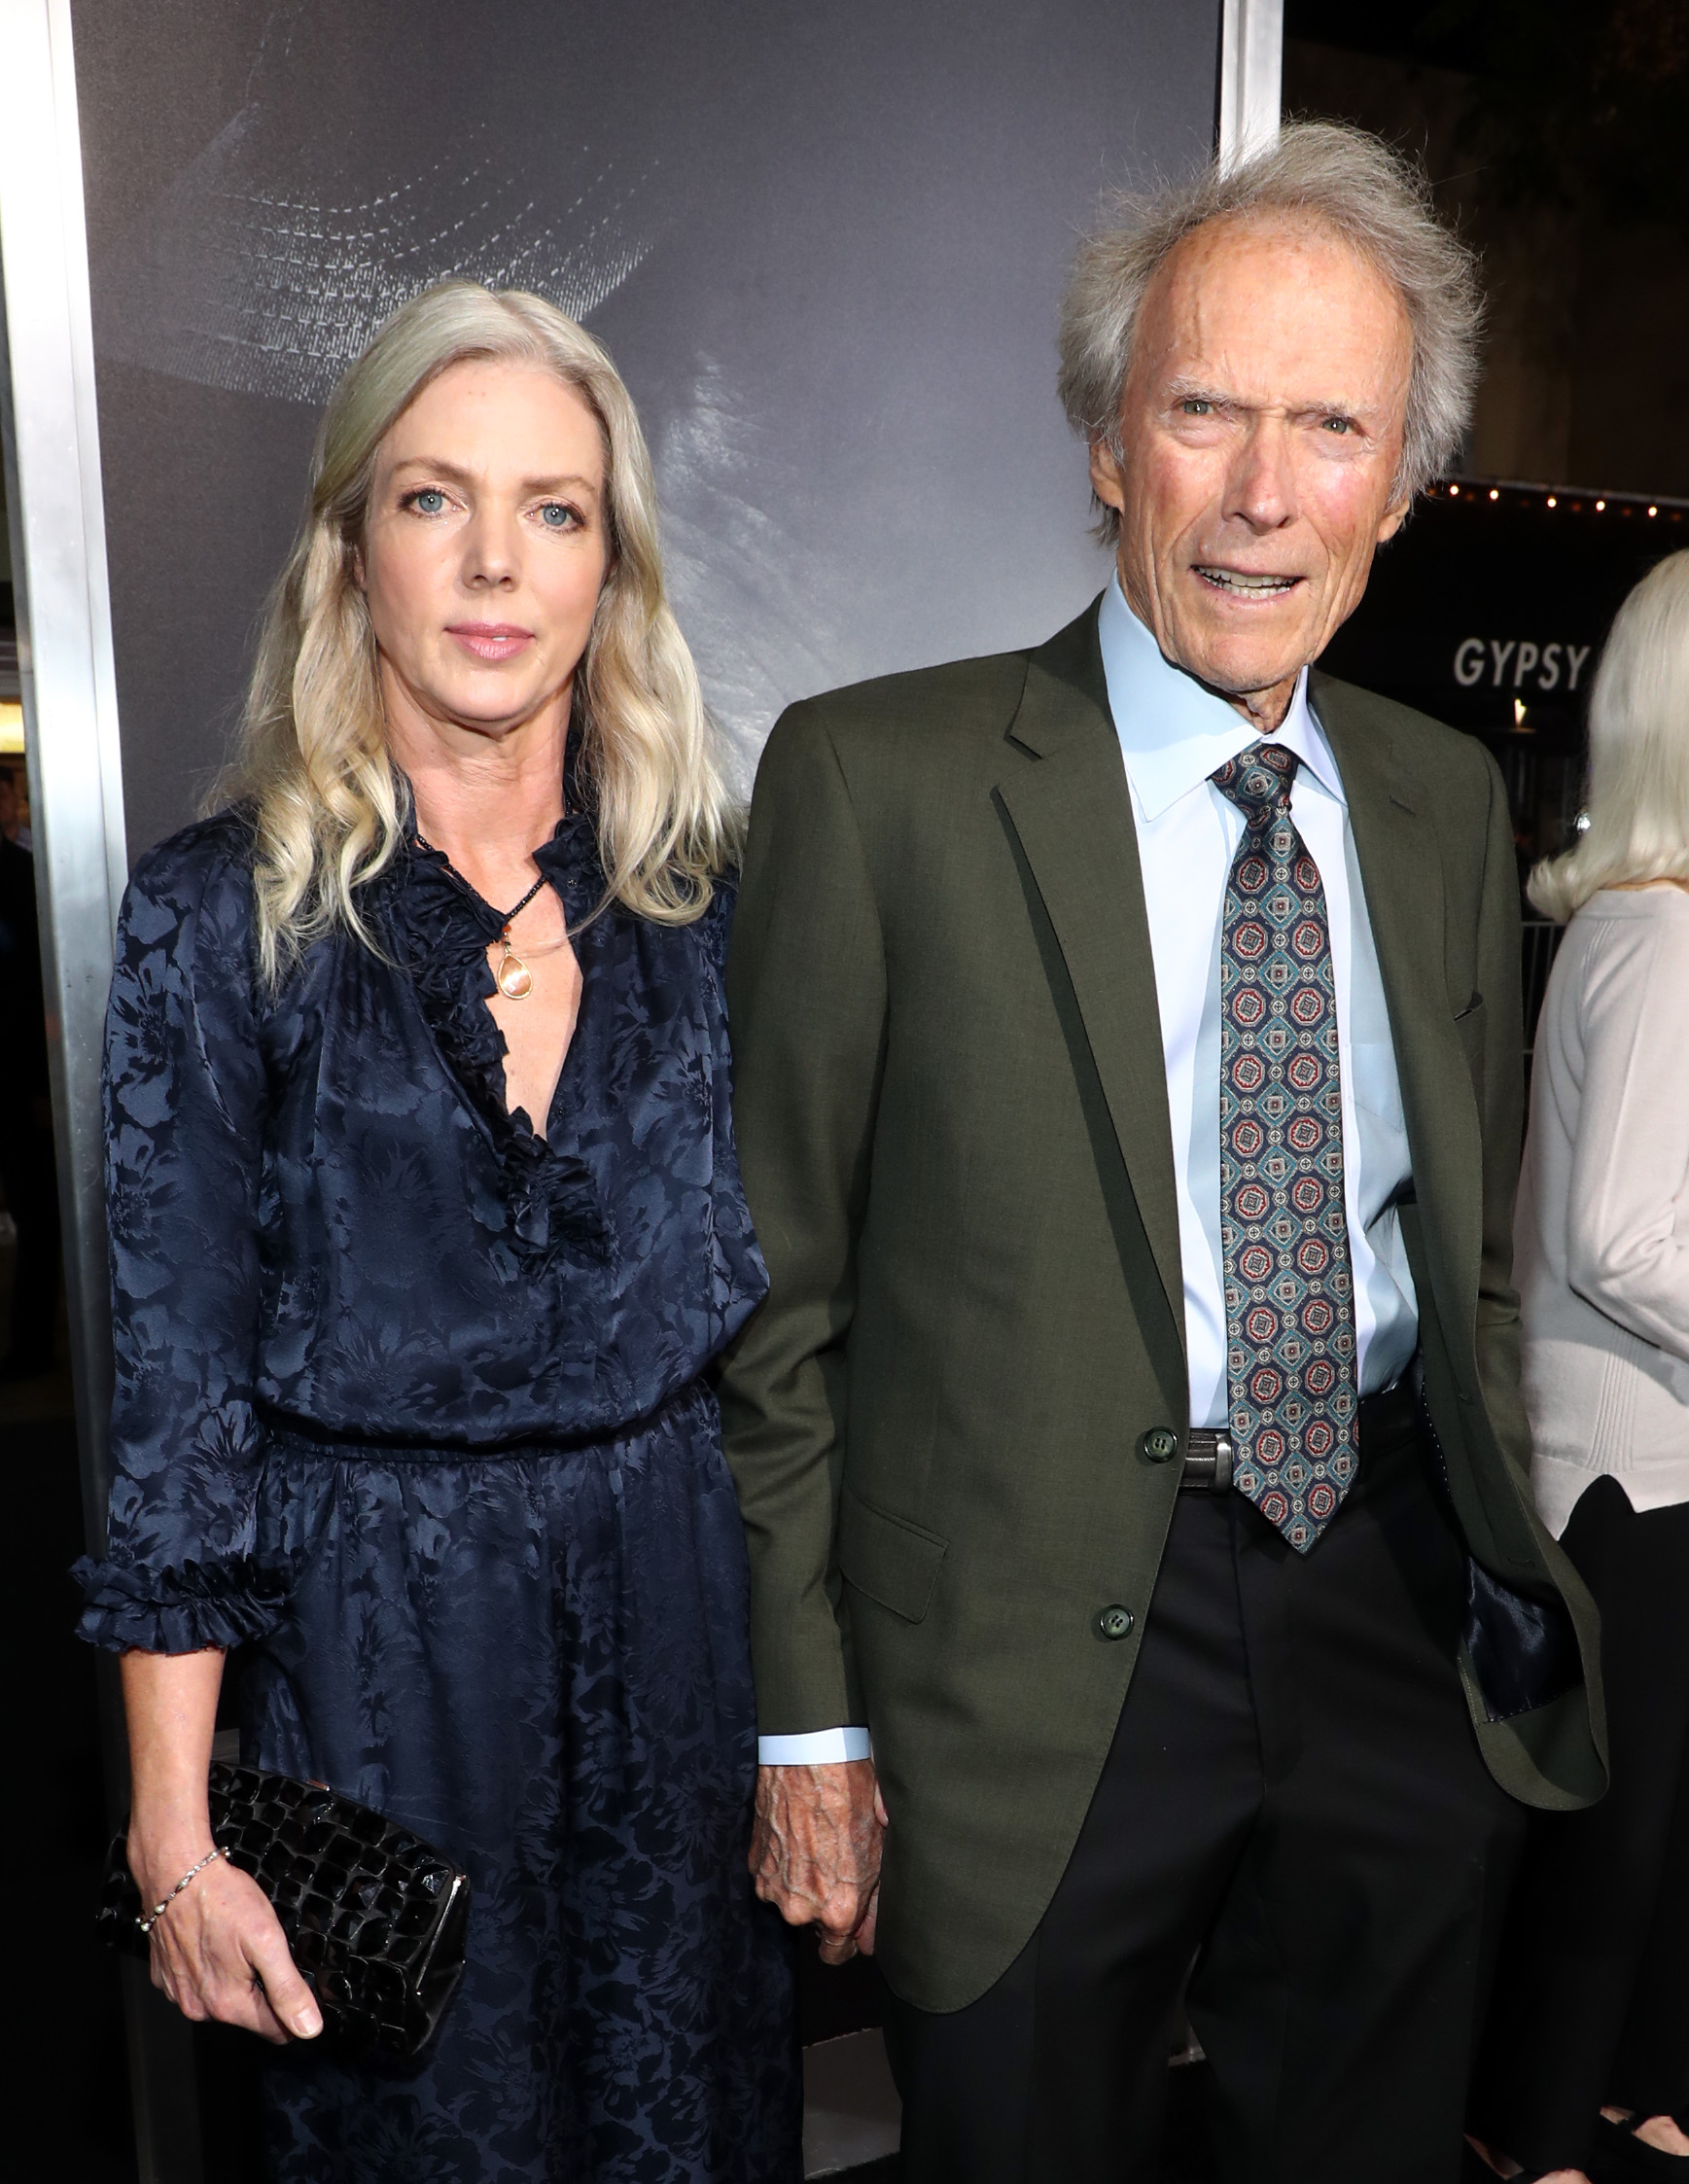 Clint Eastwood and Christina Sandera at the Sully New York premiere in 2016